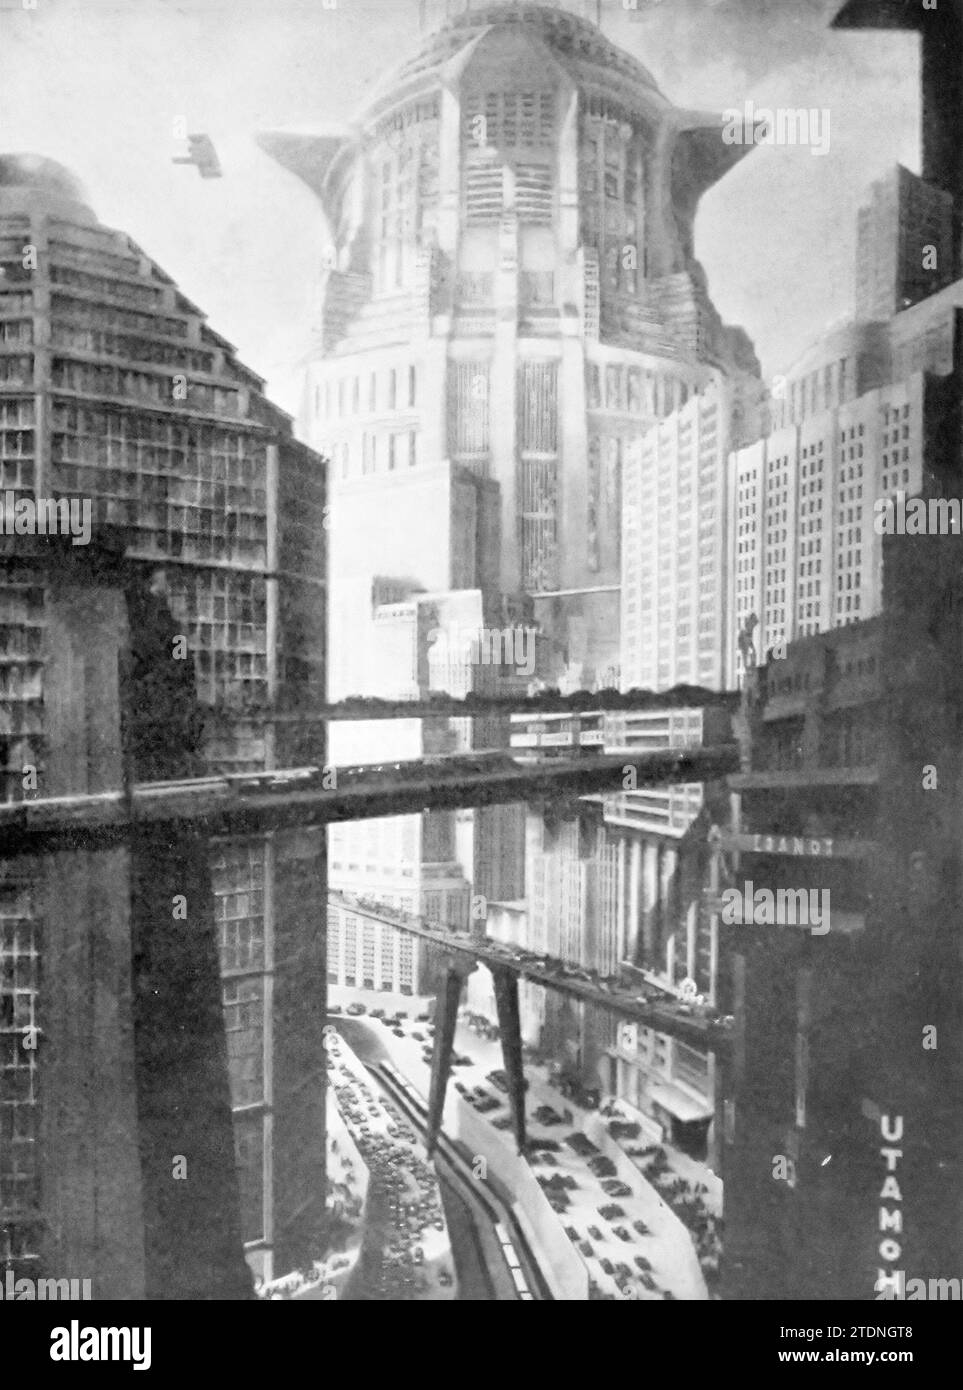 Wonder City of the Future Metropolis is a 1927 German expressionist science-fiction silent film directed by Fritz Lang and written by Thea von Harbou in collaboration with Lang from von Harbou's 1925 novel of the same name (which was intentionally written as a treatment). It stars Gustav Fröhlich, Alfred Abel, Rudolf Klein-Rogge, and Brigitte Helm. Erich Pommer produced it in the Babelsberg Studios for Universum Film A.G. (UFA). The silent film is regarded as a pioneering science-fiction movie, being among the first feature-length movies of that genre. Filming took place over 17 months in 1925 Stock Photo